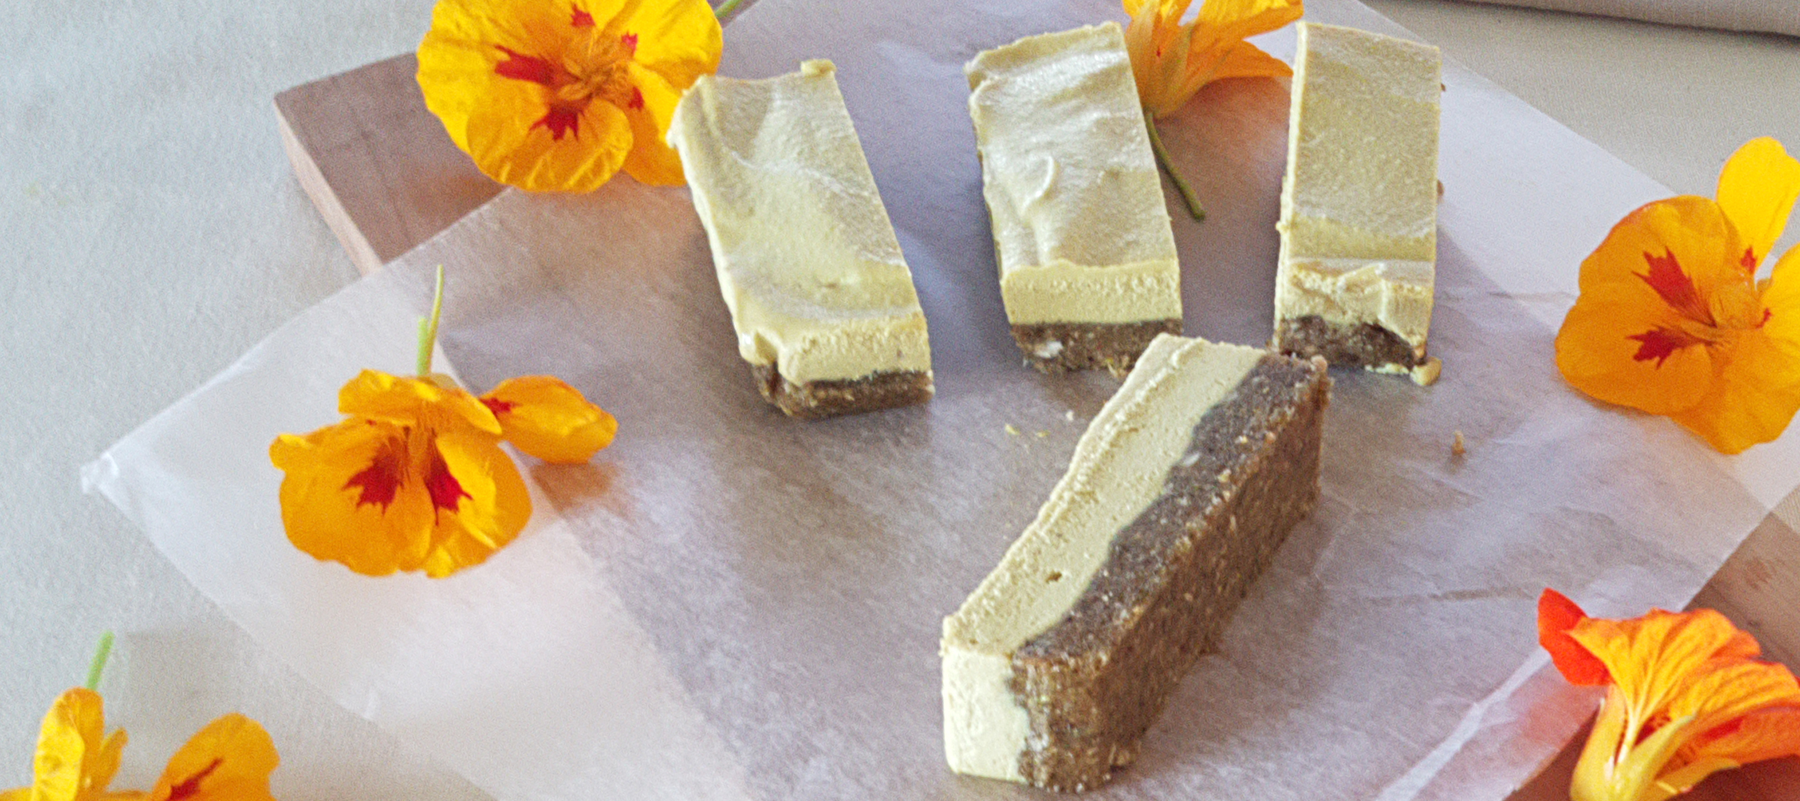 Recipe for raw Ginger Crunch Slice. Gluten-free and Diary-free this is a delicious remake of the traditional Kiwi Ginger Crunch.